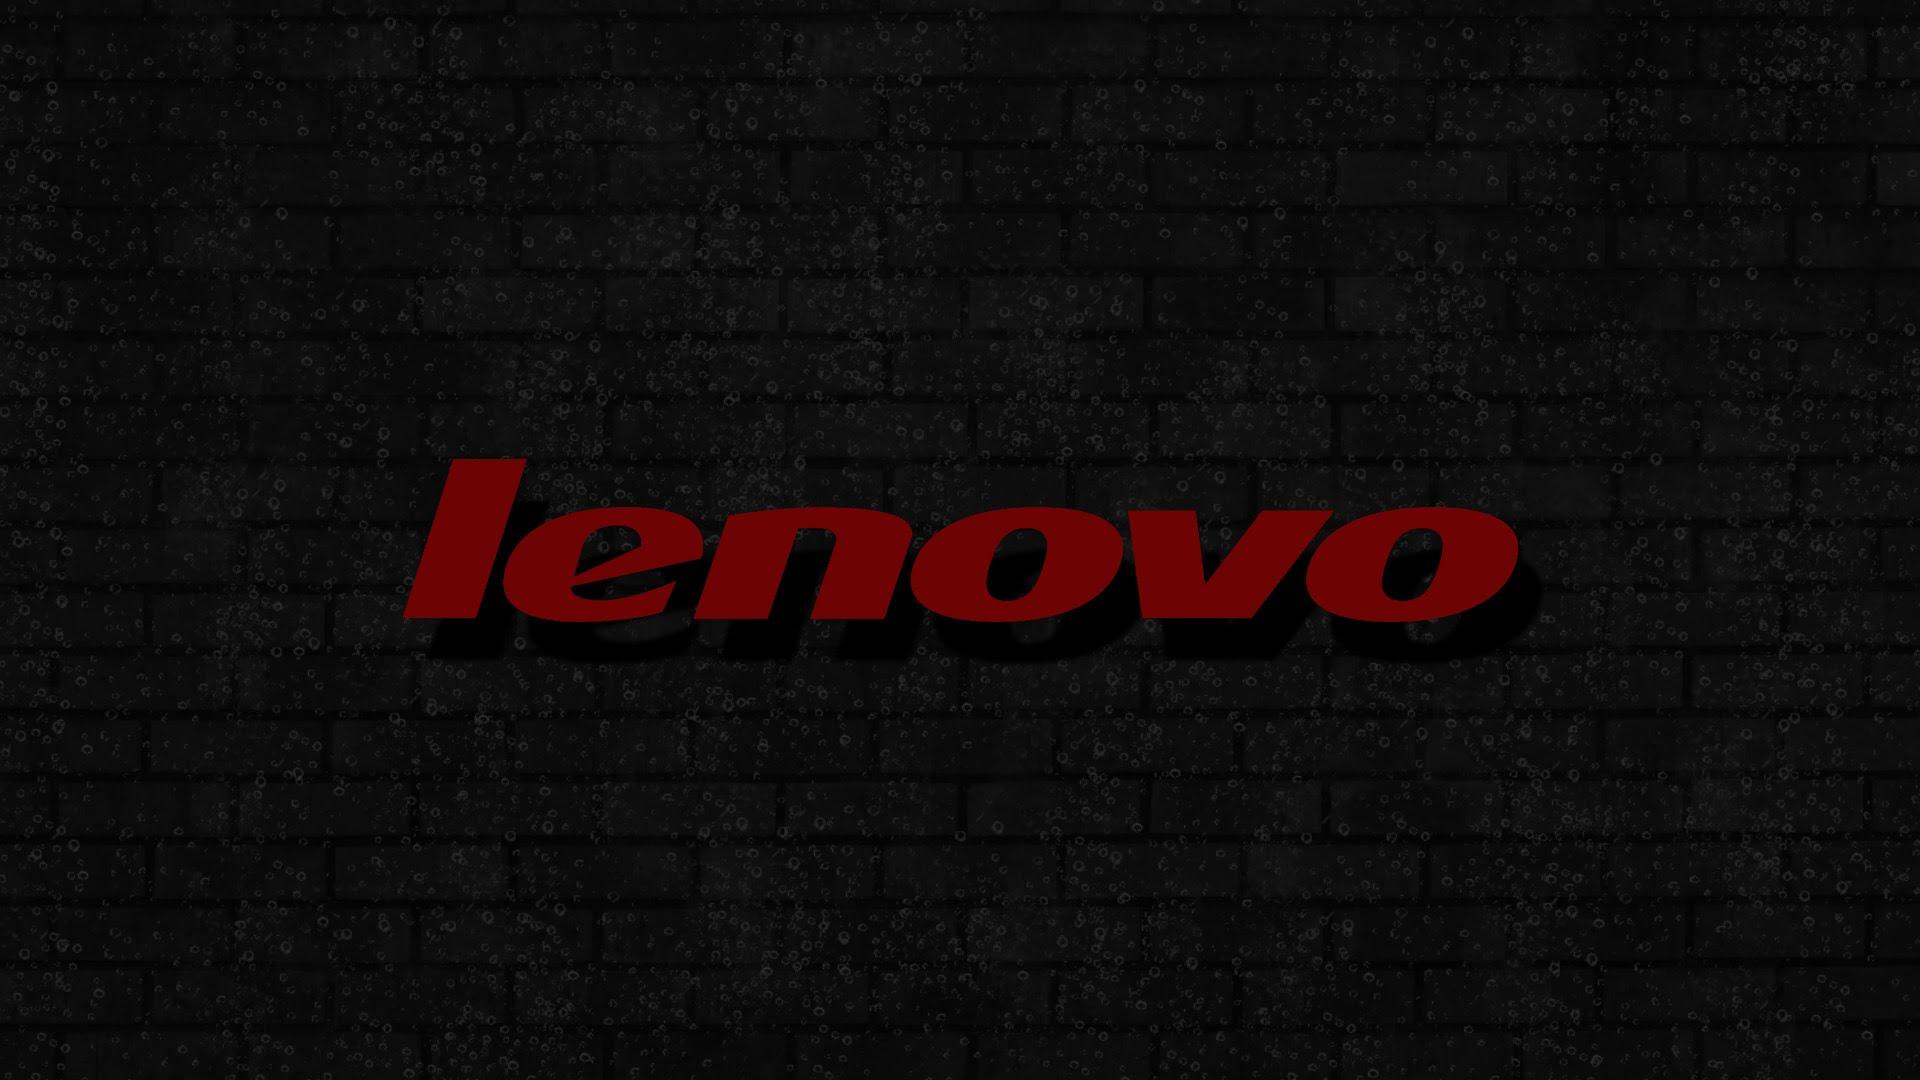 Wallpaper Laptop Lenovo, image collections of wallpaper